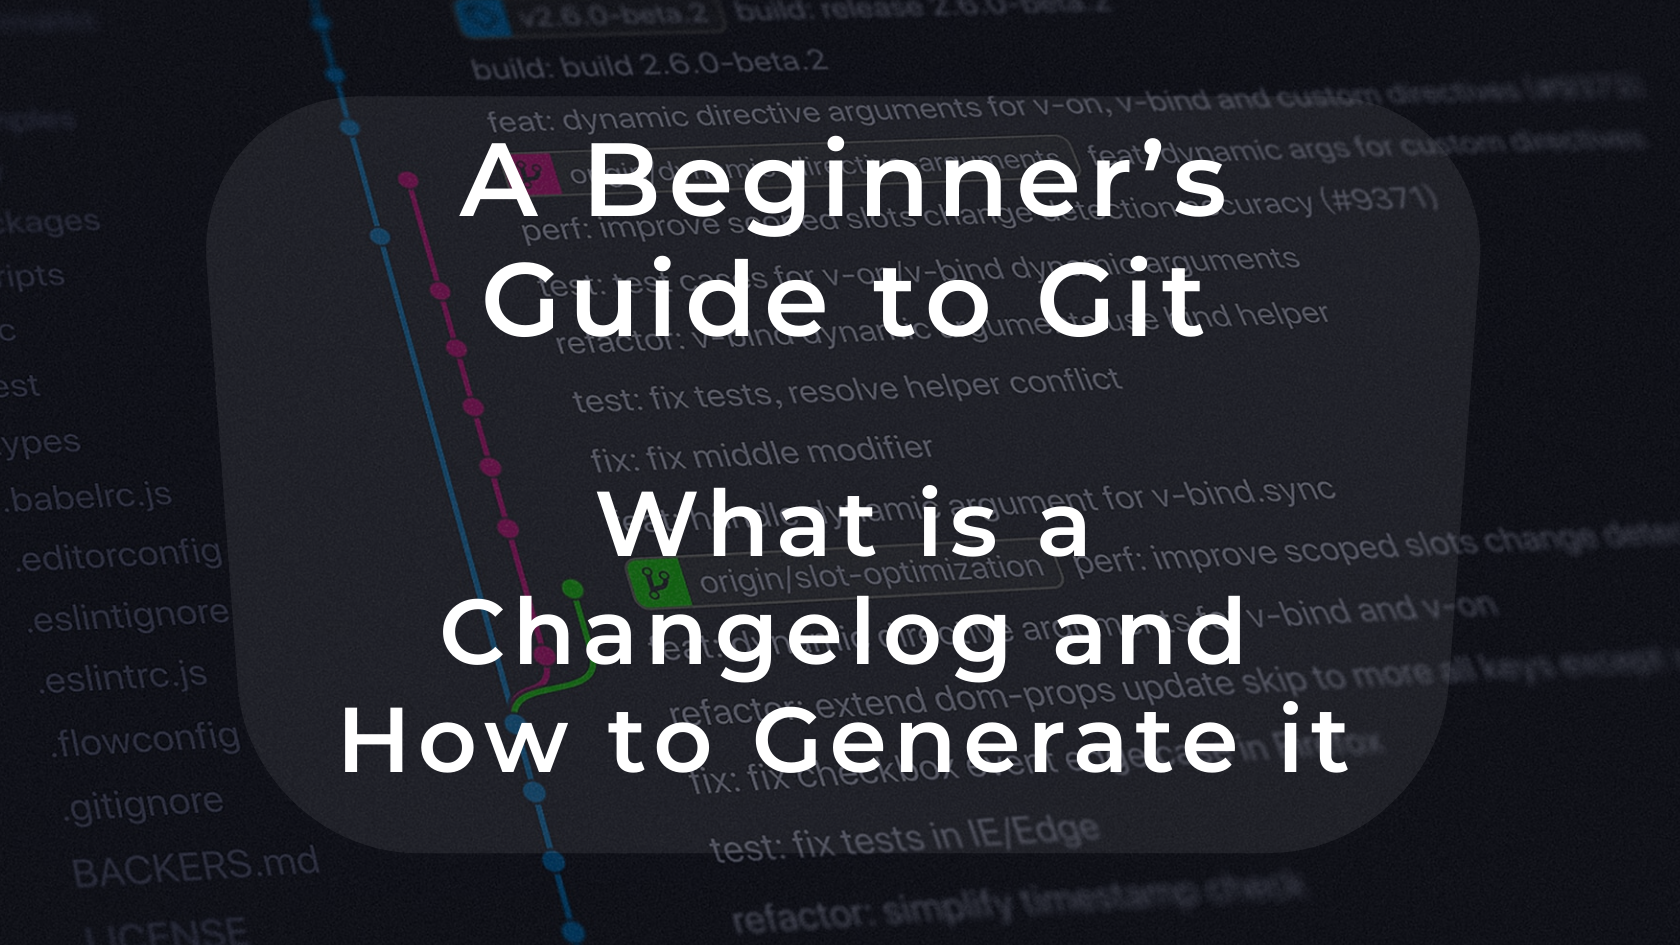 A Beginner’s Guide to Git — What is a Changelog and How to Generate it